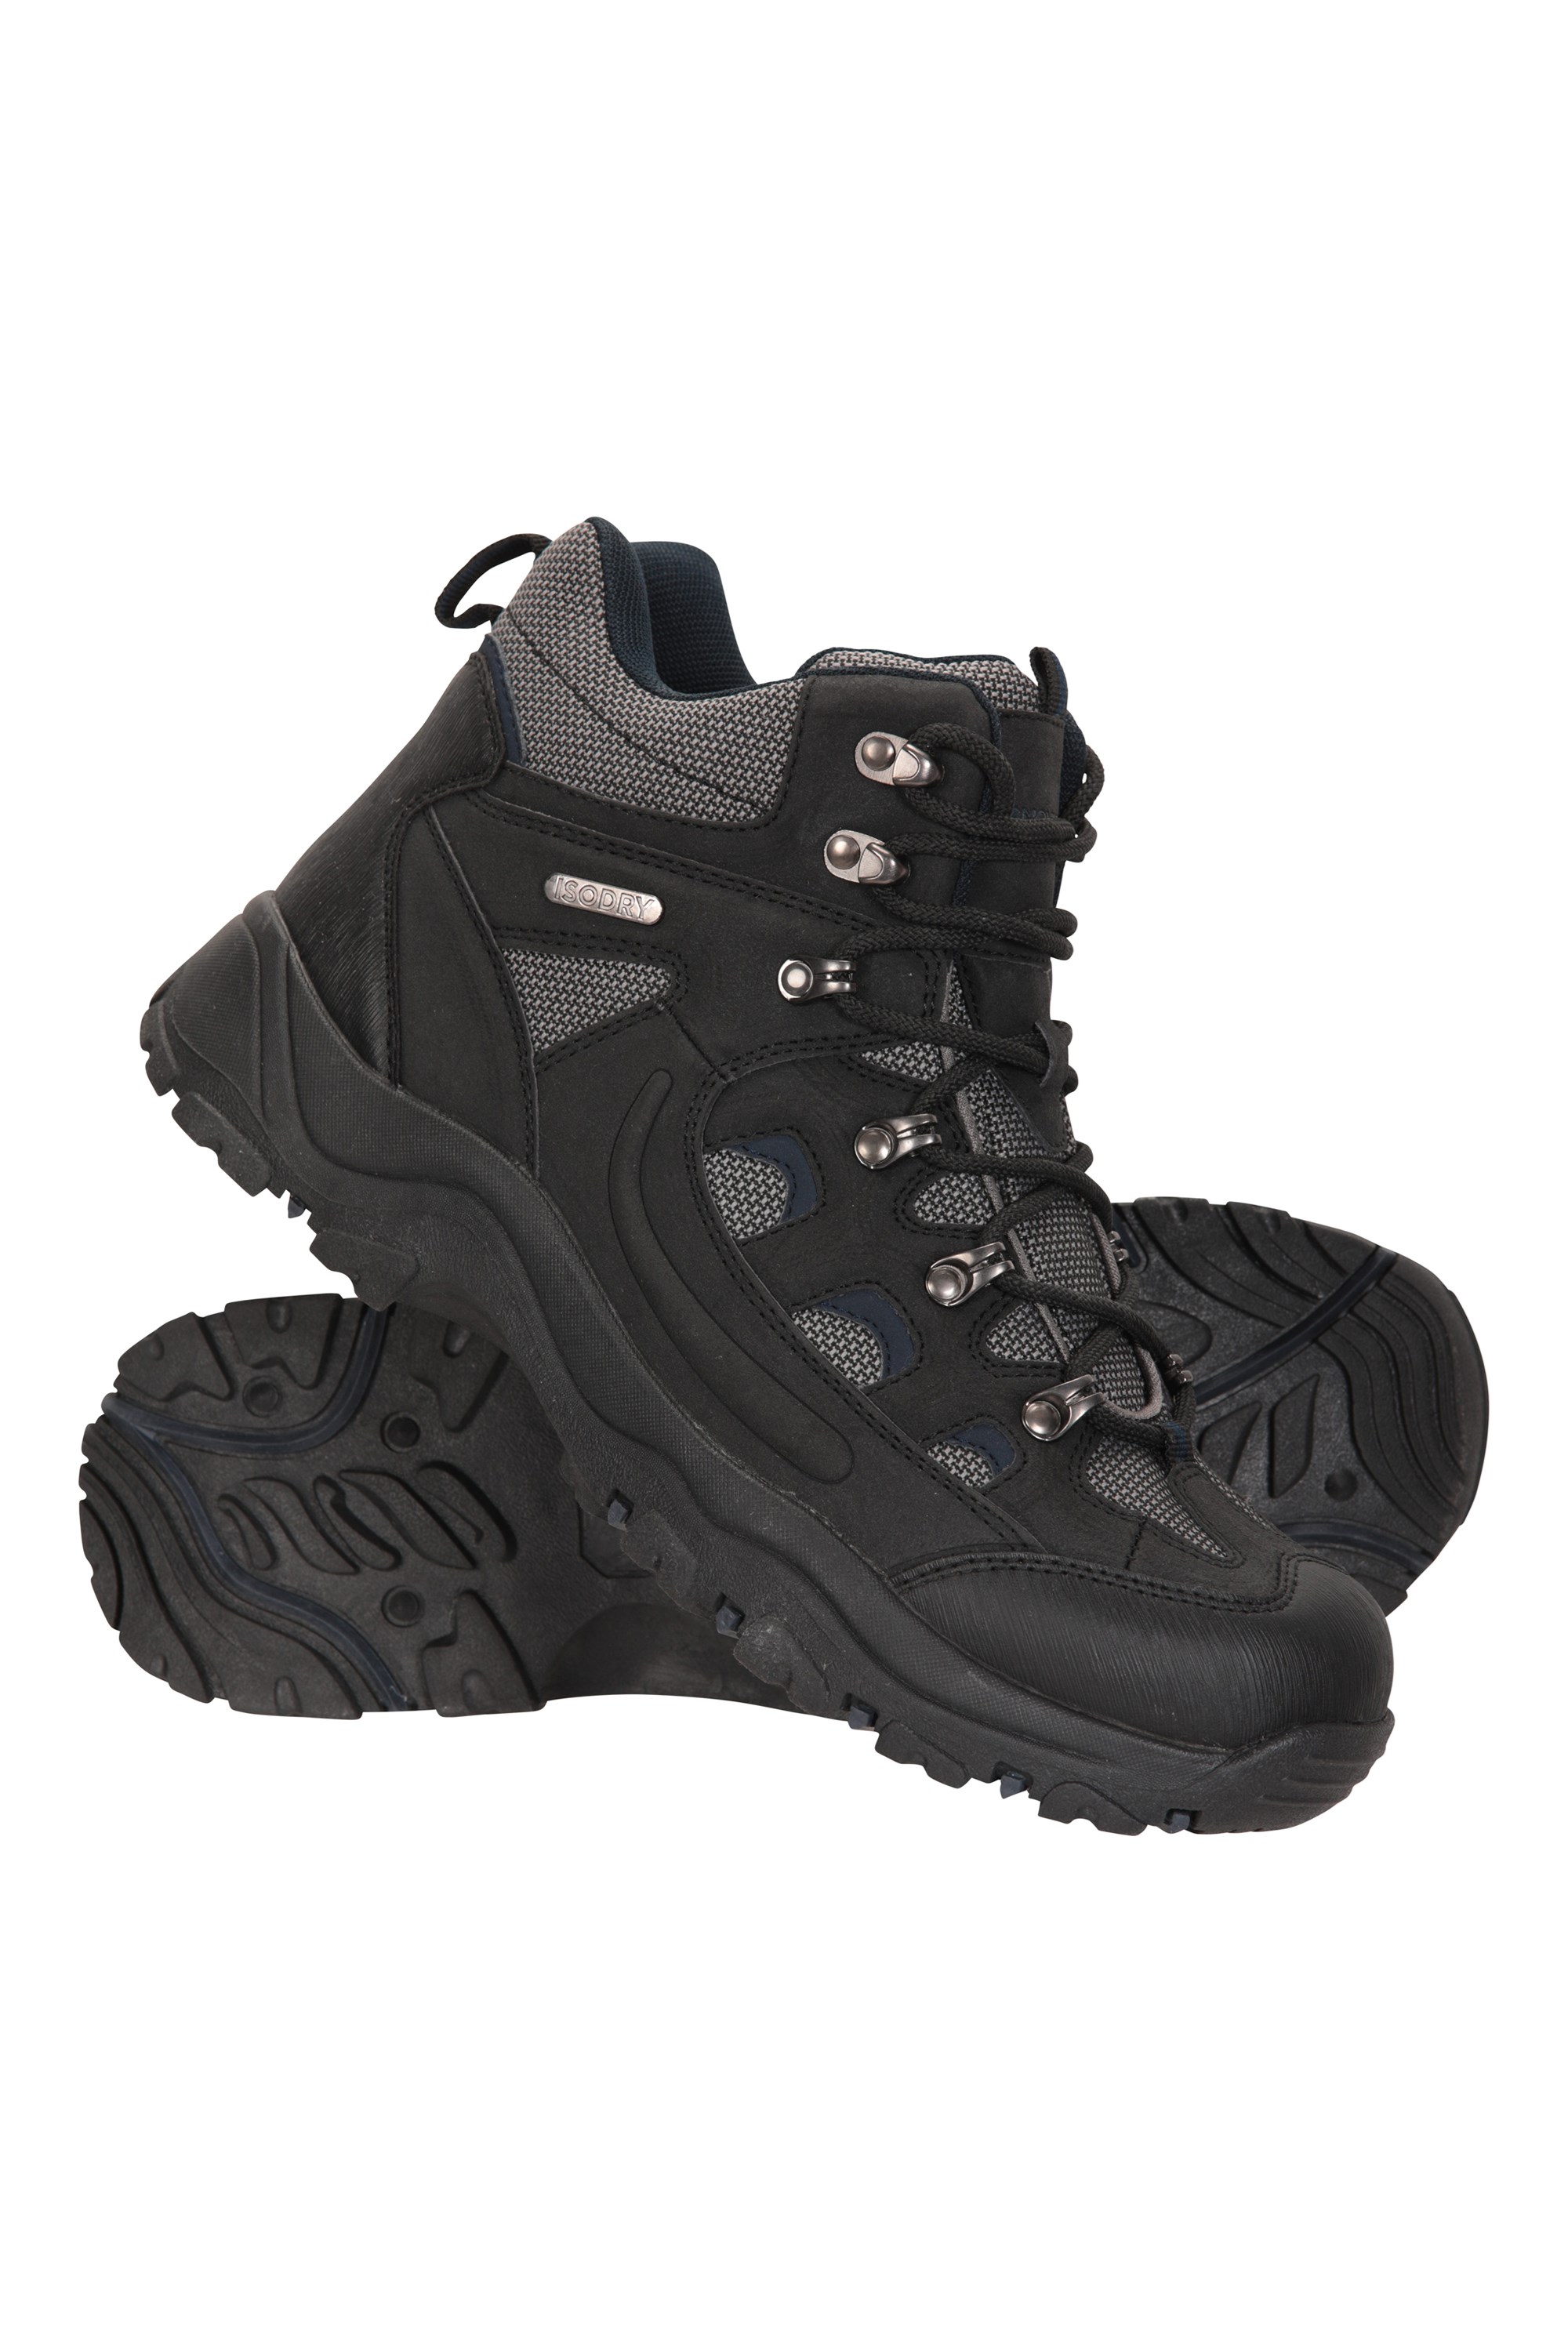 mens waterproof boots clearance